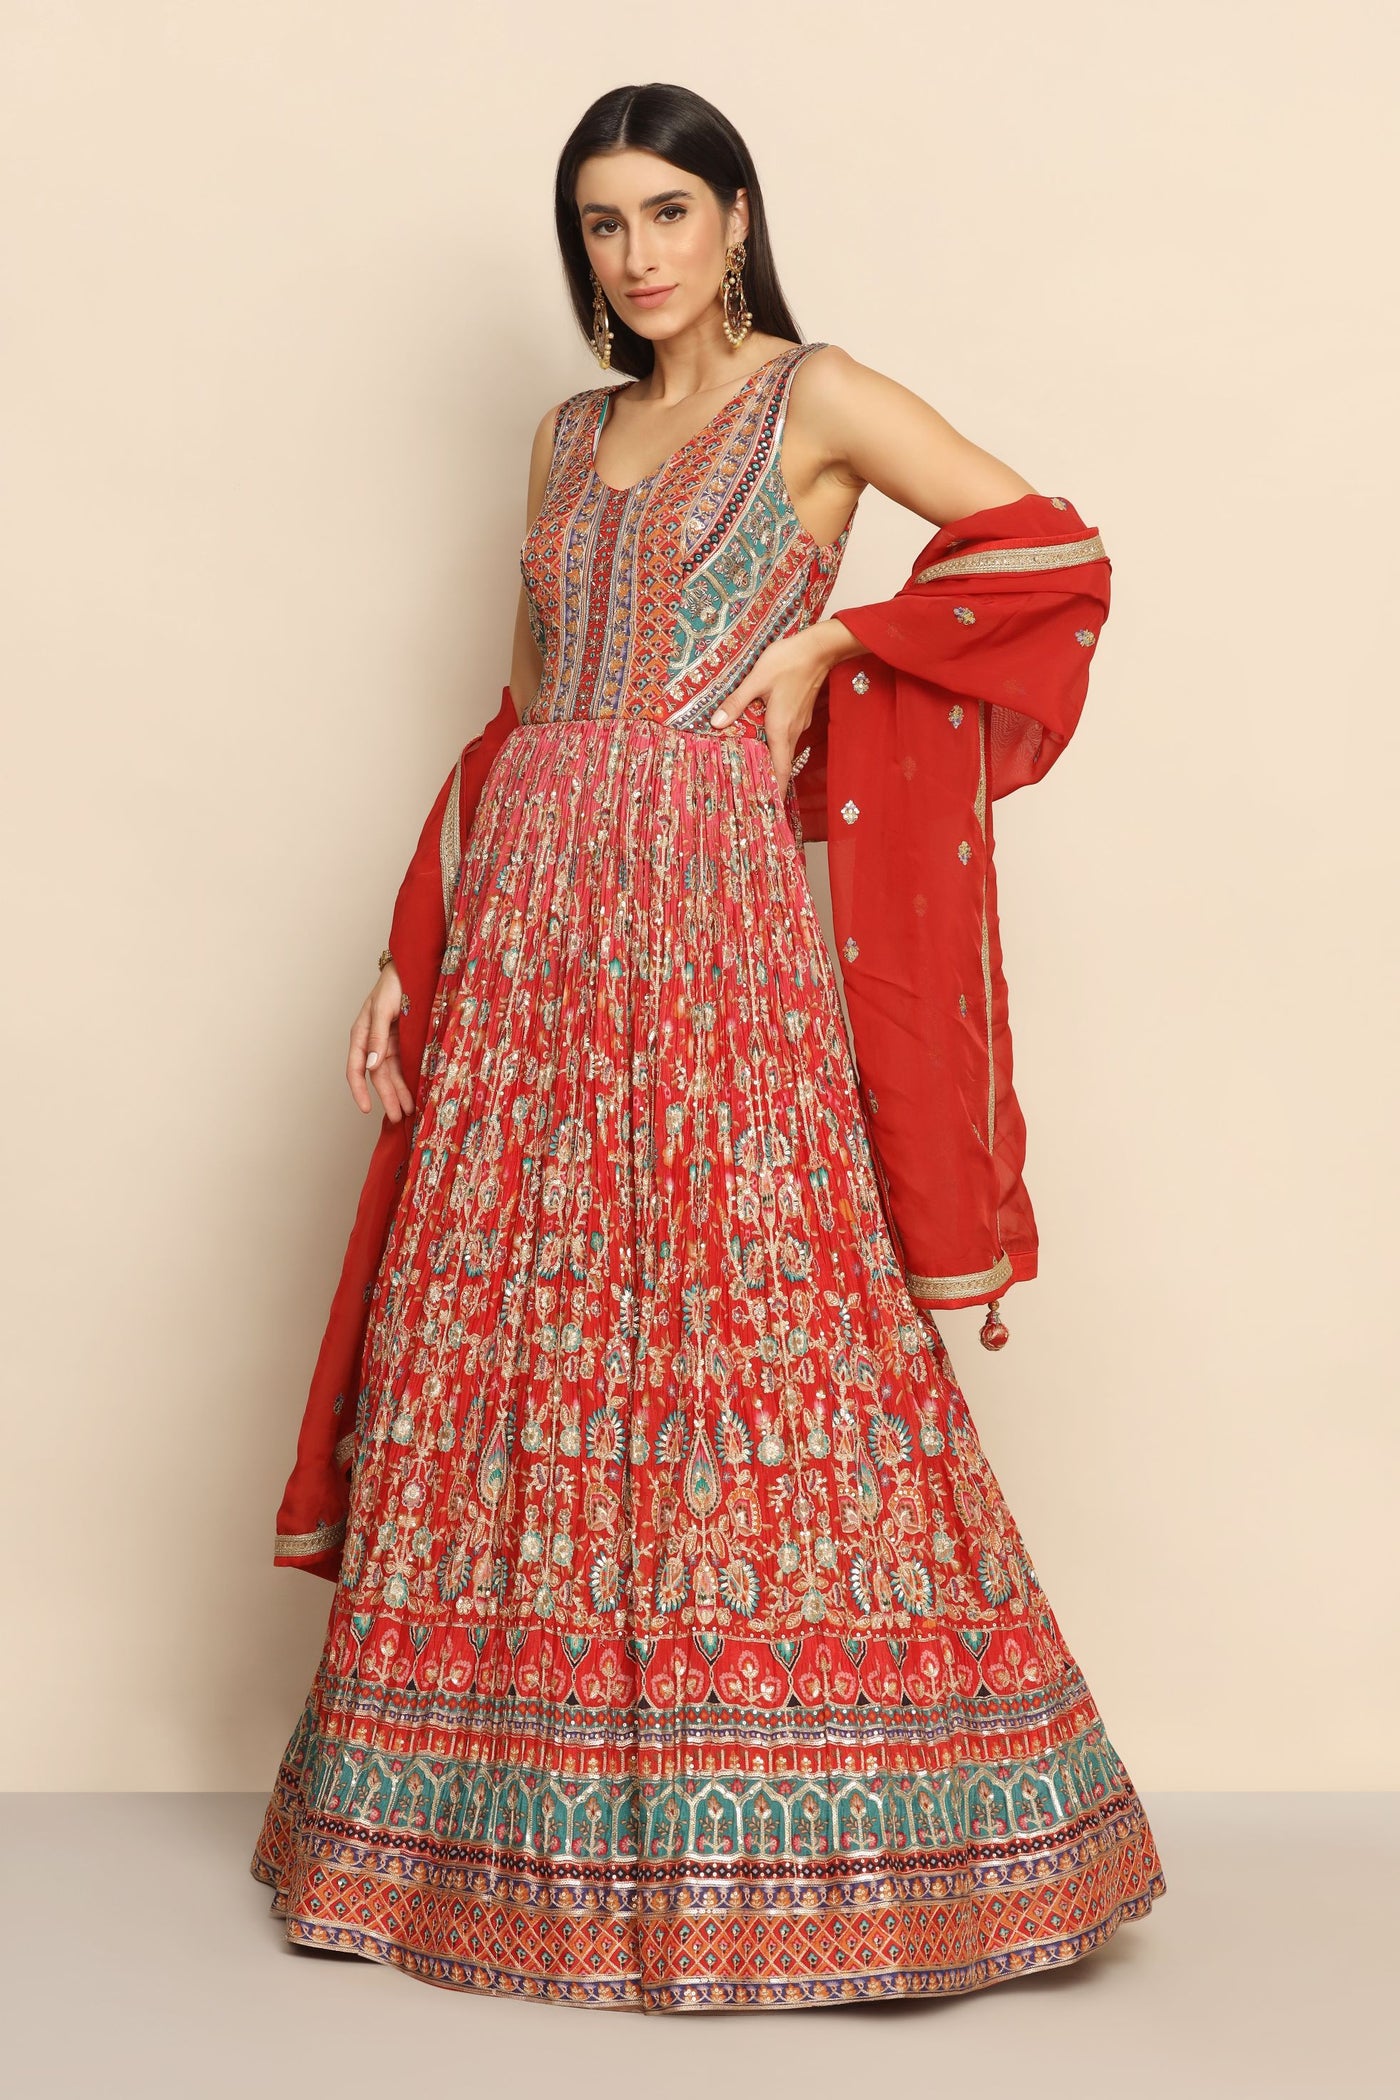 Captivating Red Dress with Sequins and Zari - Sparkle with Elegance